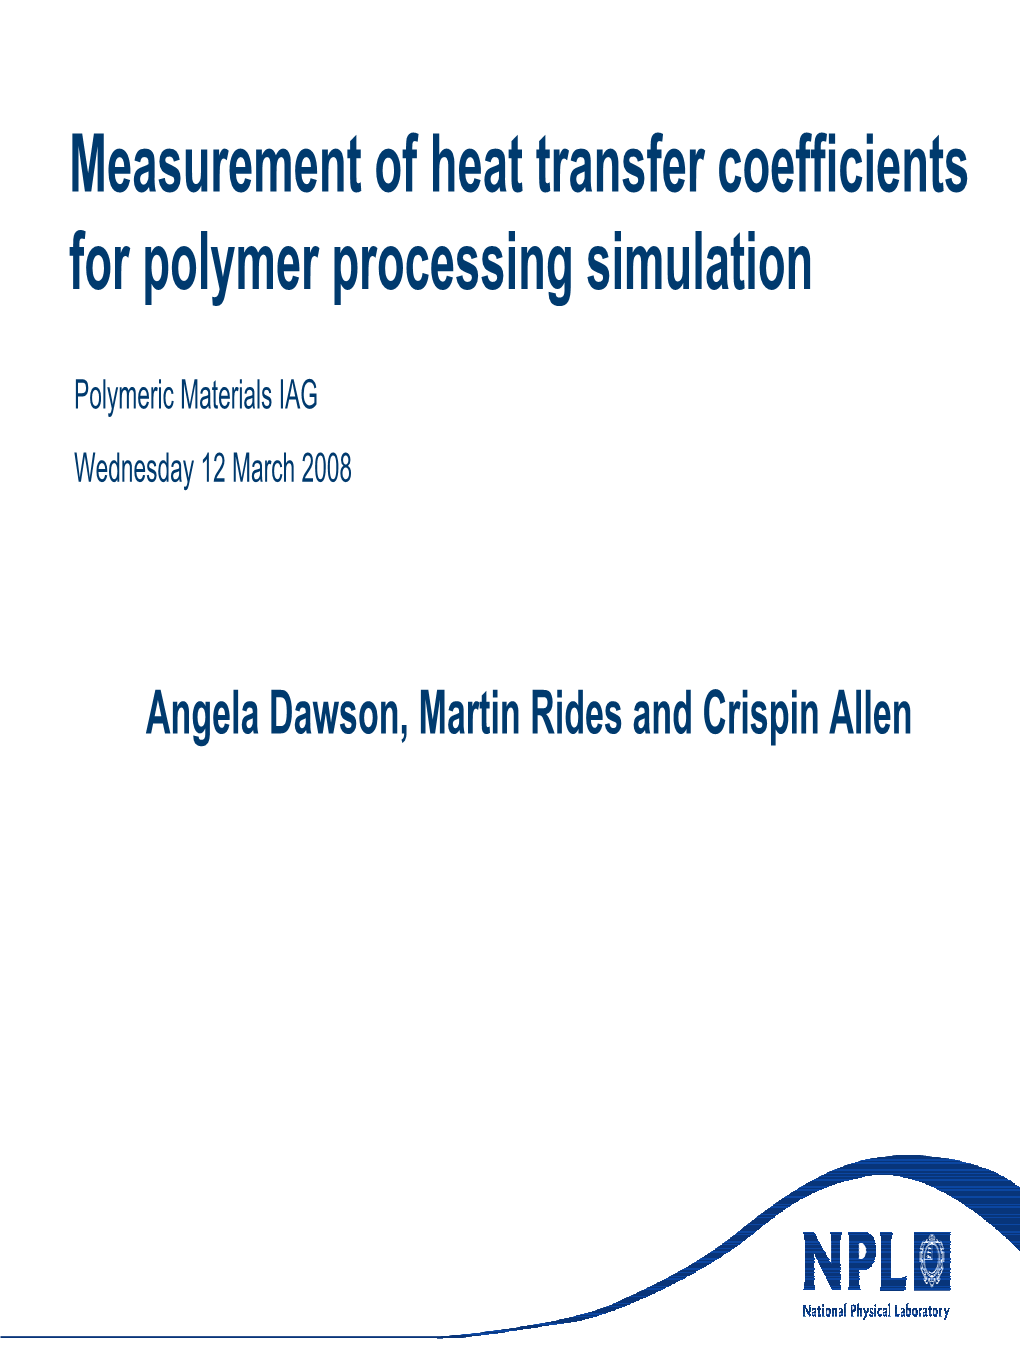 Measurement of Heat Transfer Coefficients for Polymer Processing Simulation